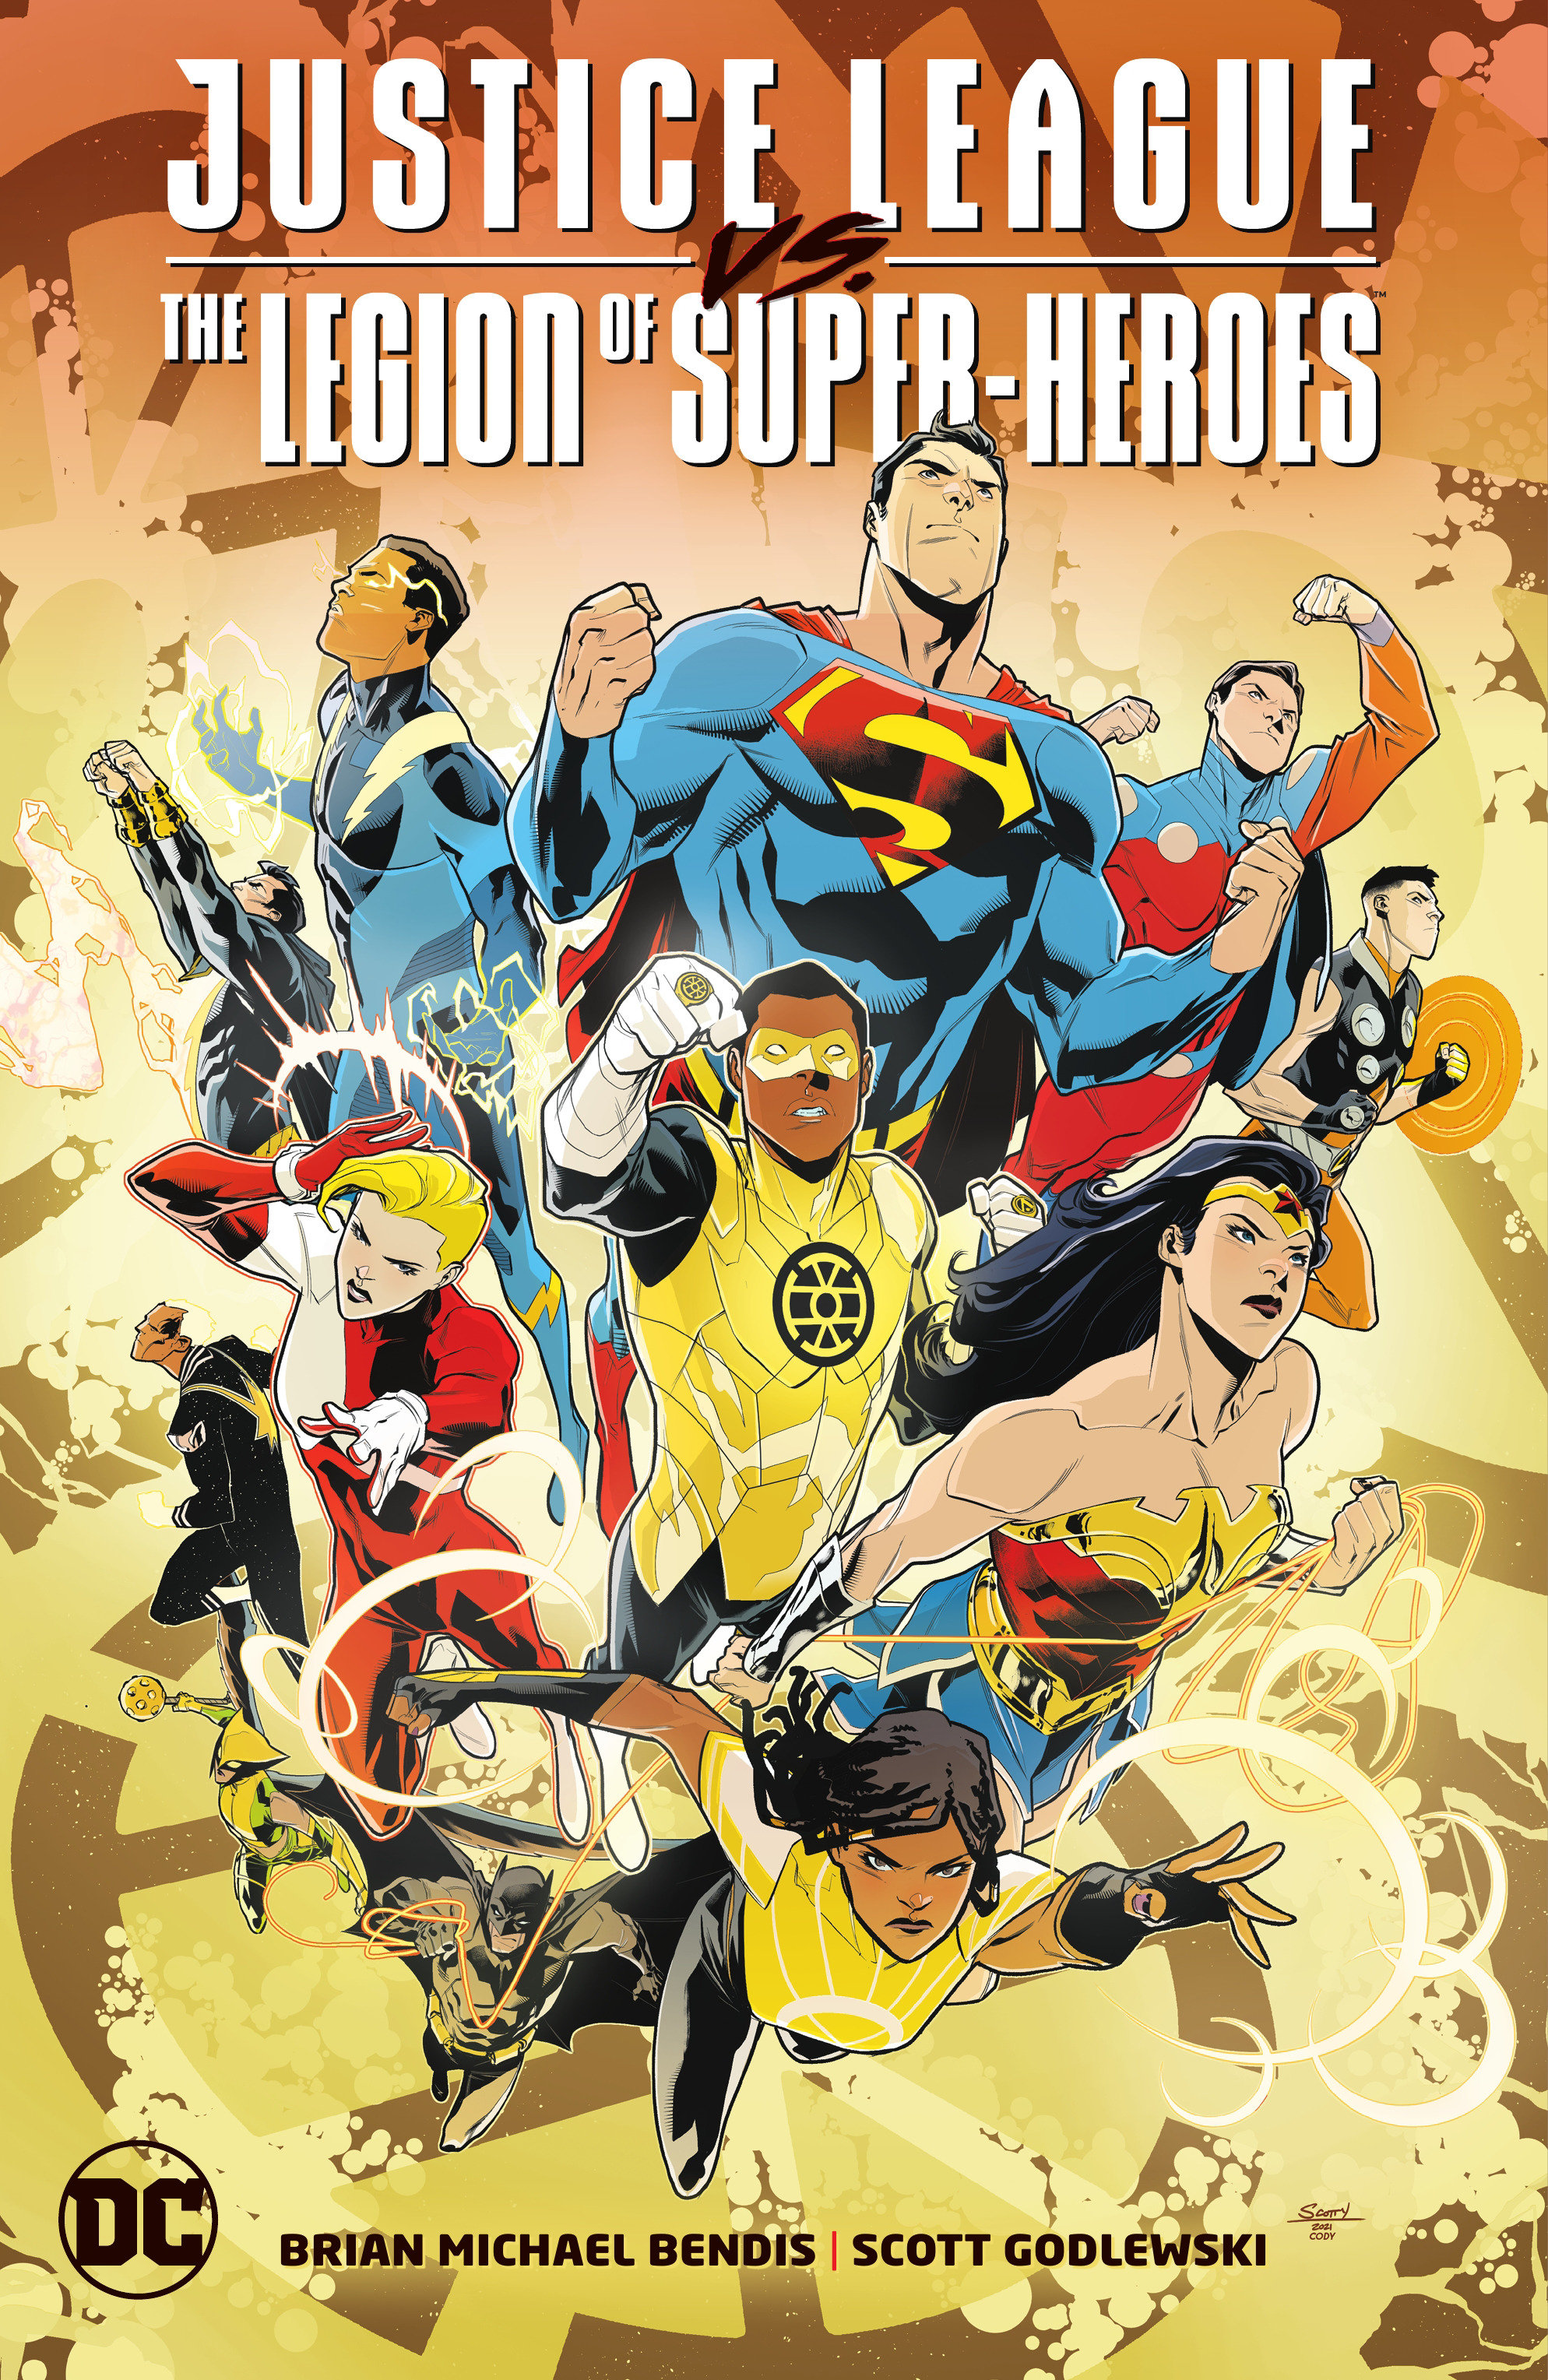 Justice League Vs The Legion of Super-Heroes Graphic Novel